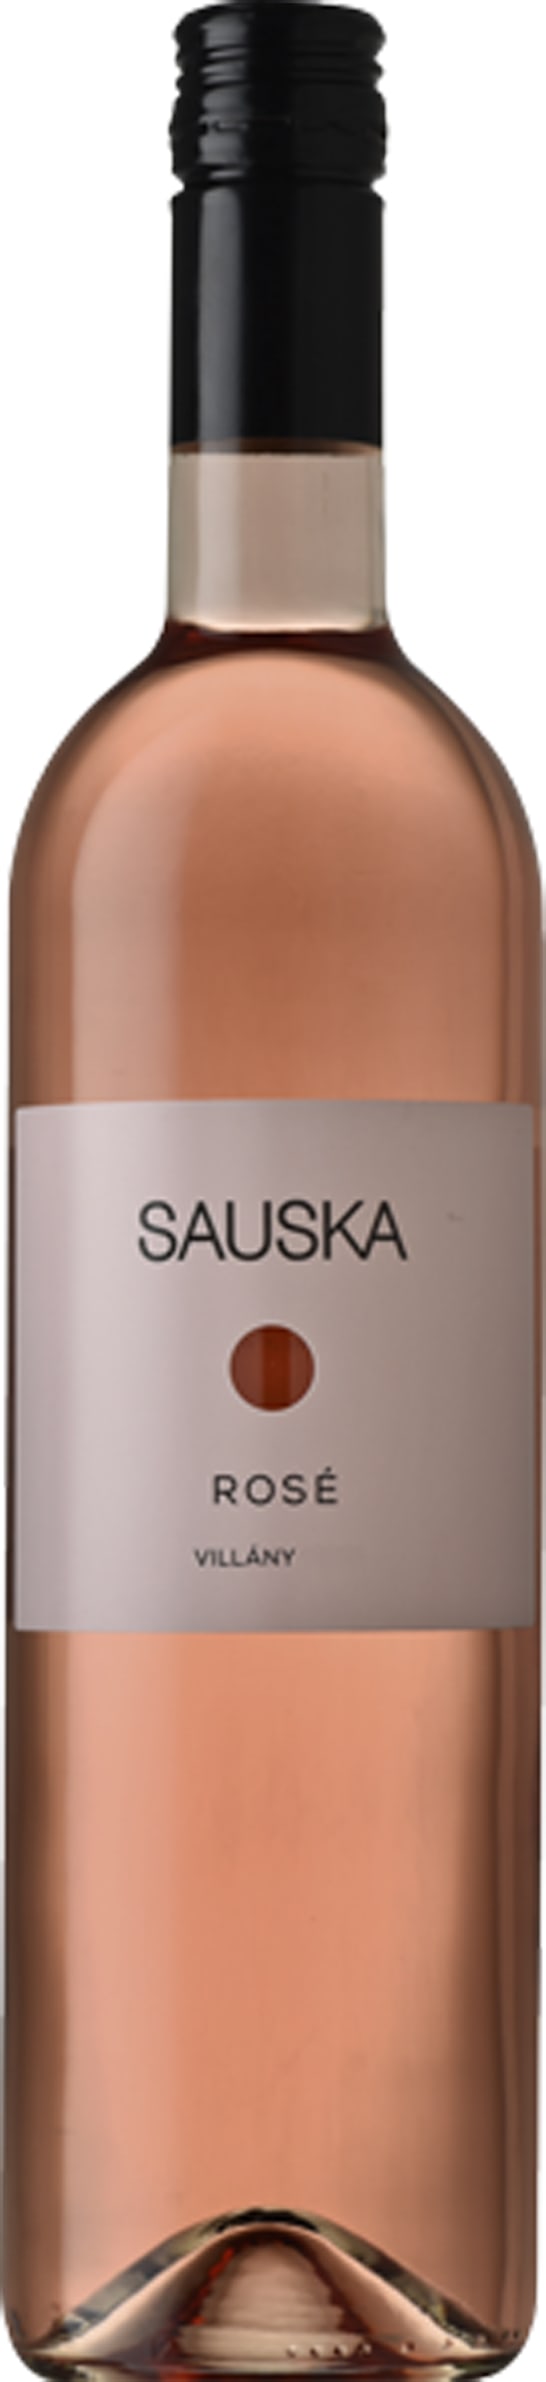 Sauska Rose 2022 75cl - Buy Sauska Wines from GREAT WINES DIRECT wine shop